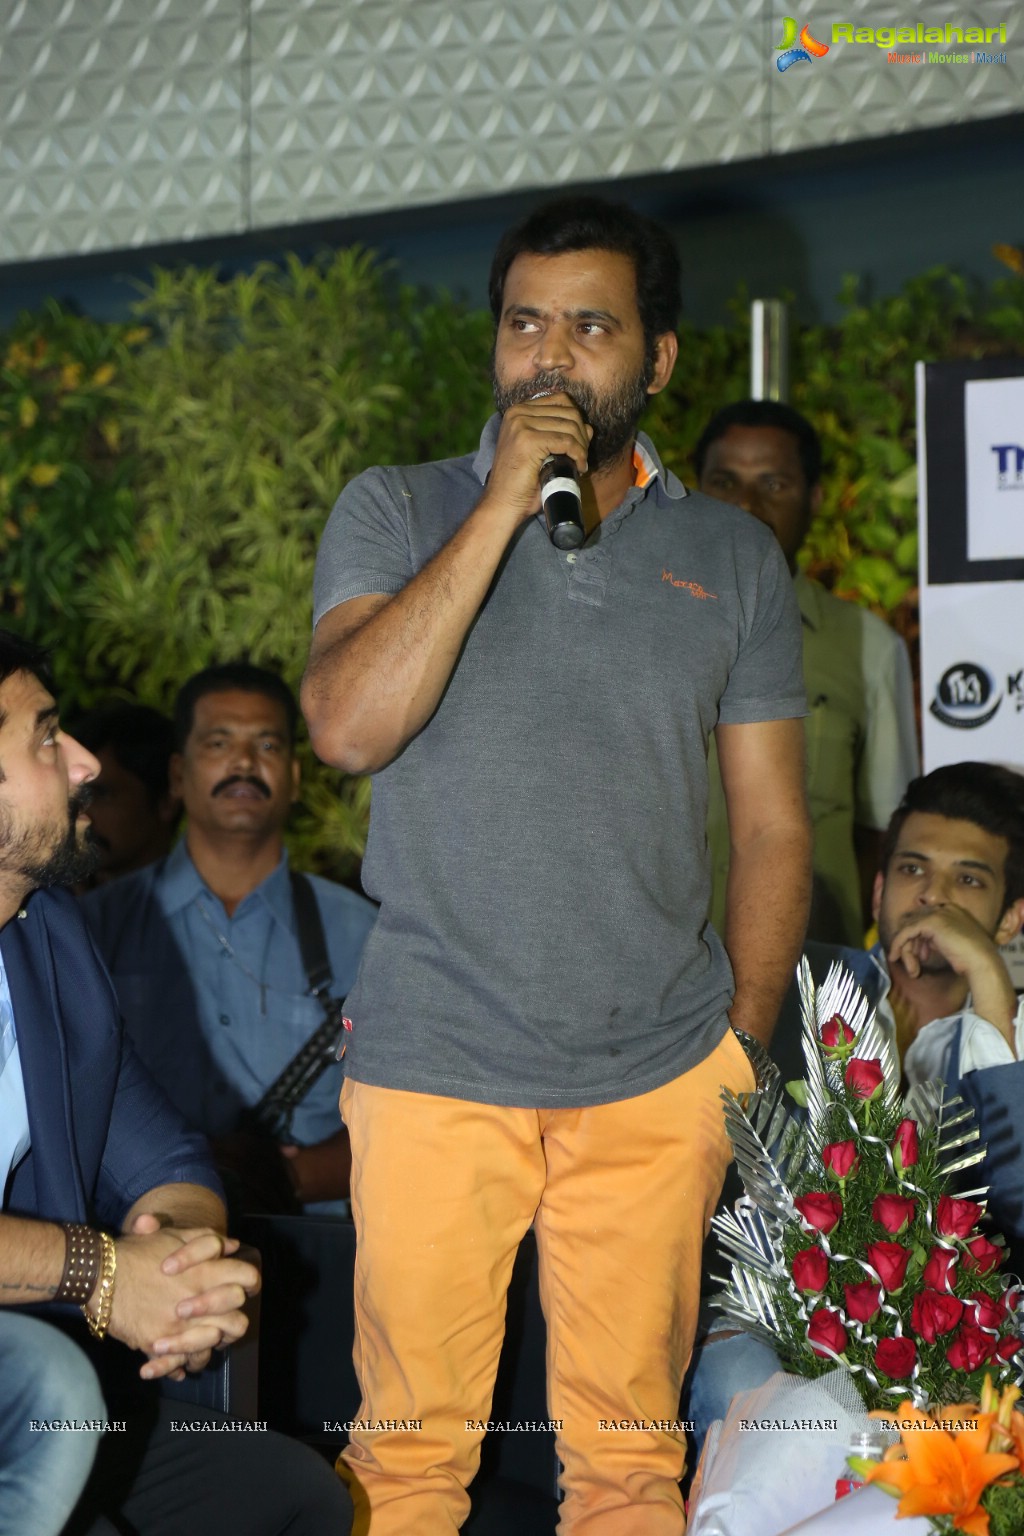 Stars and Kricket Entertainment announces launch of Hyderabad Talwars - A Celeb Cricket Team